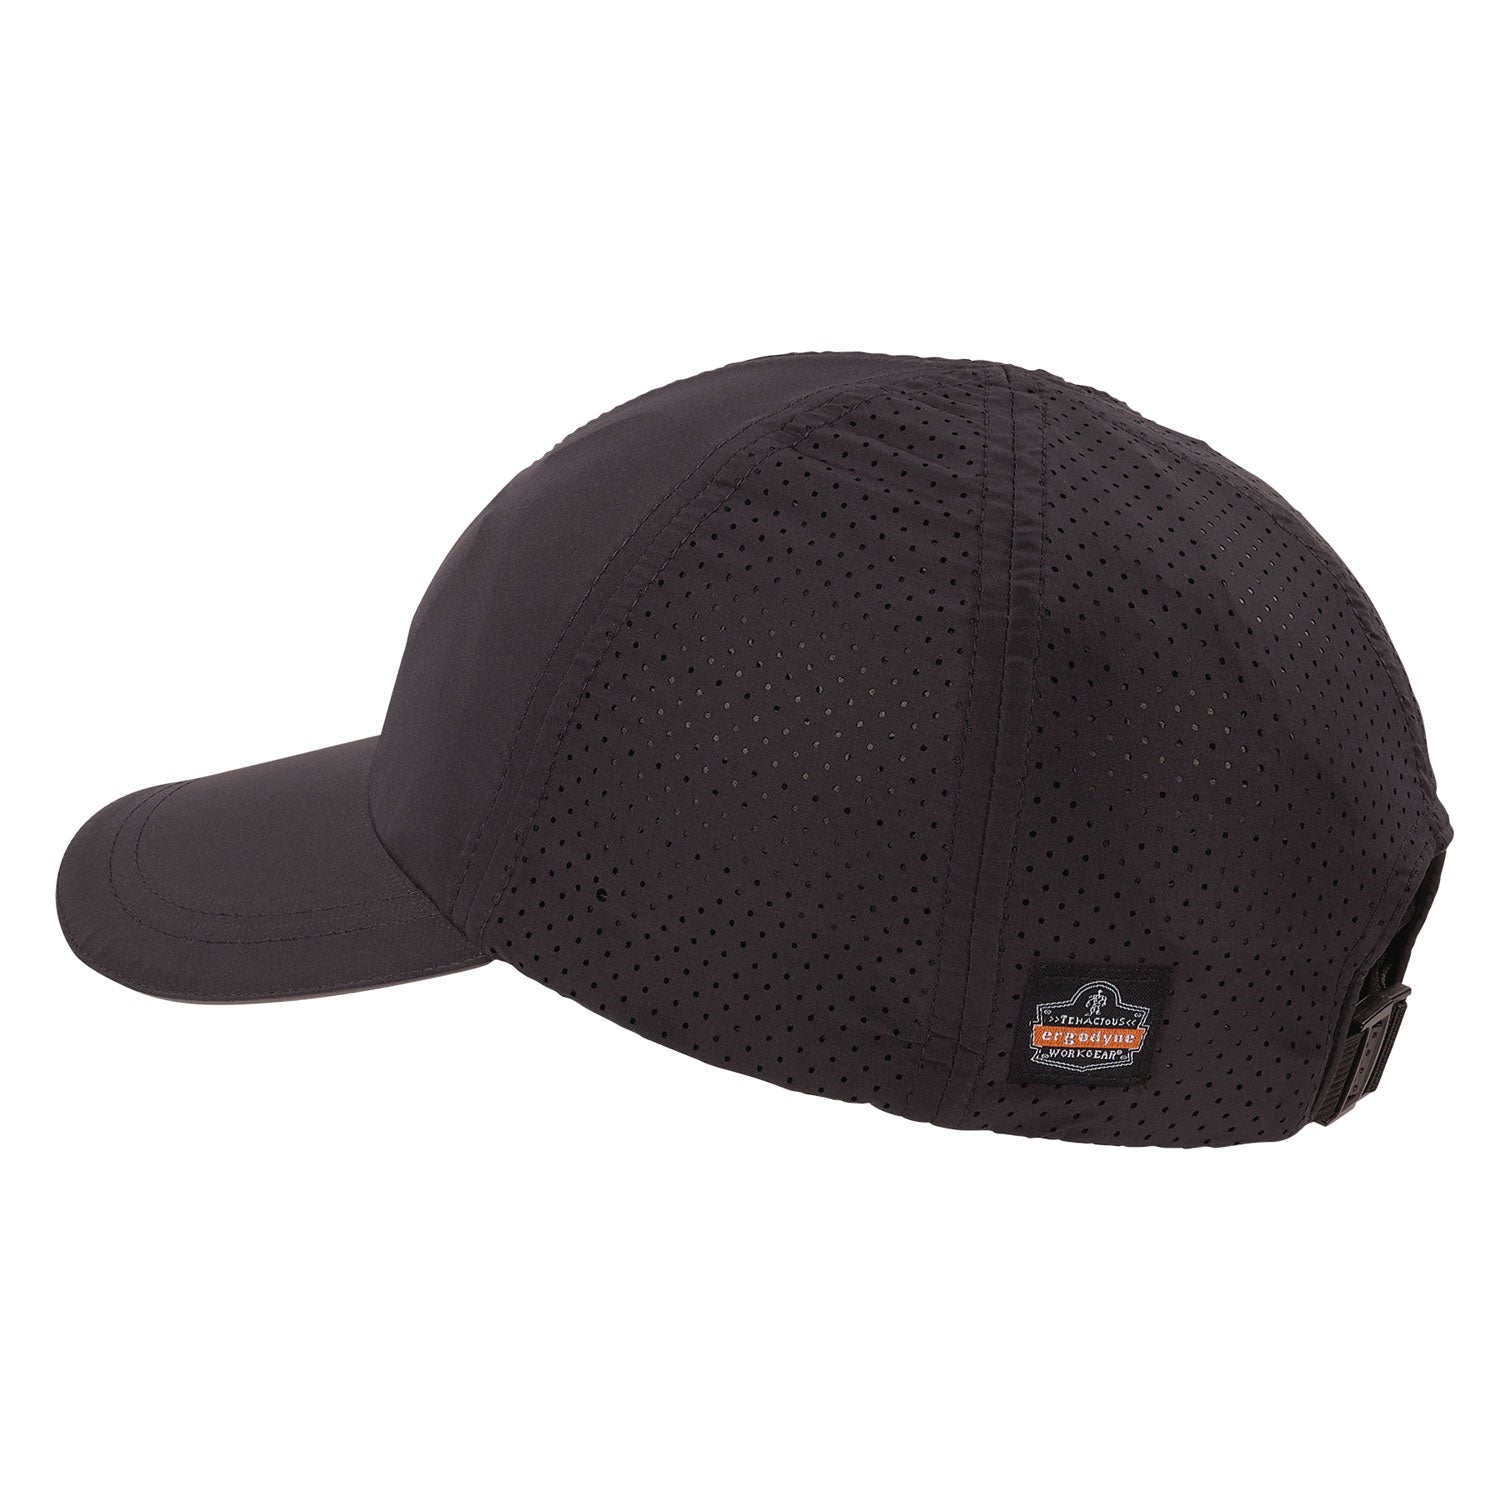 skullerz-8947-lightweight-baseball-hat-and-bump-cap-insert-x-large-2x-large-black-ships-in-1-3-business-days_ego23452 - 2